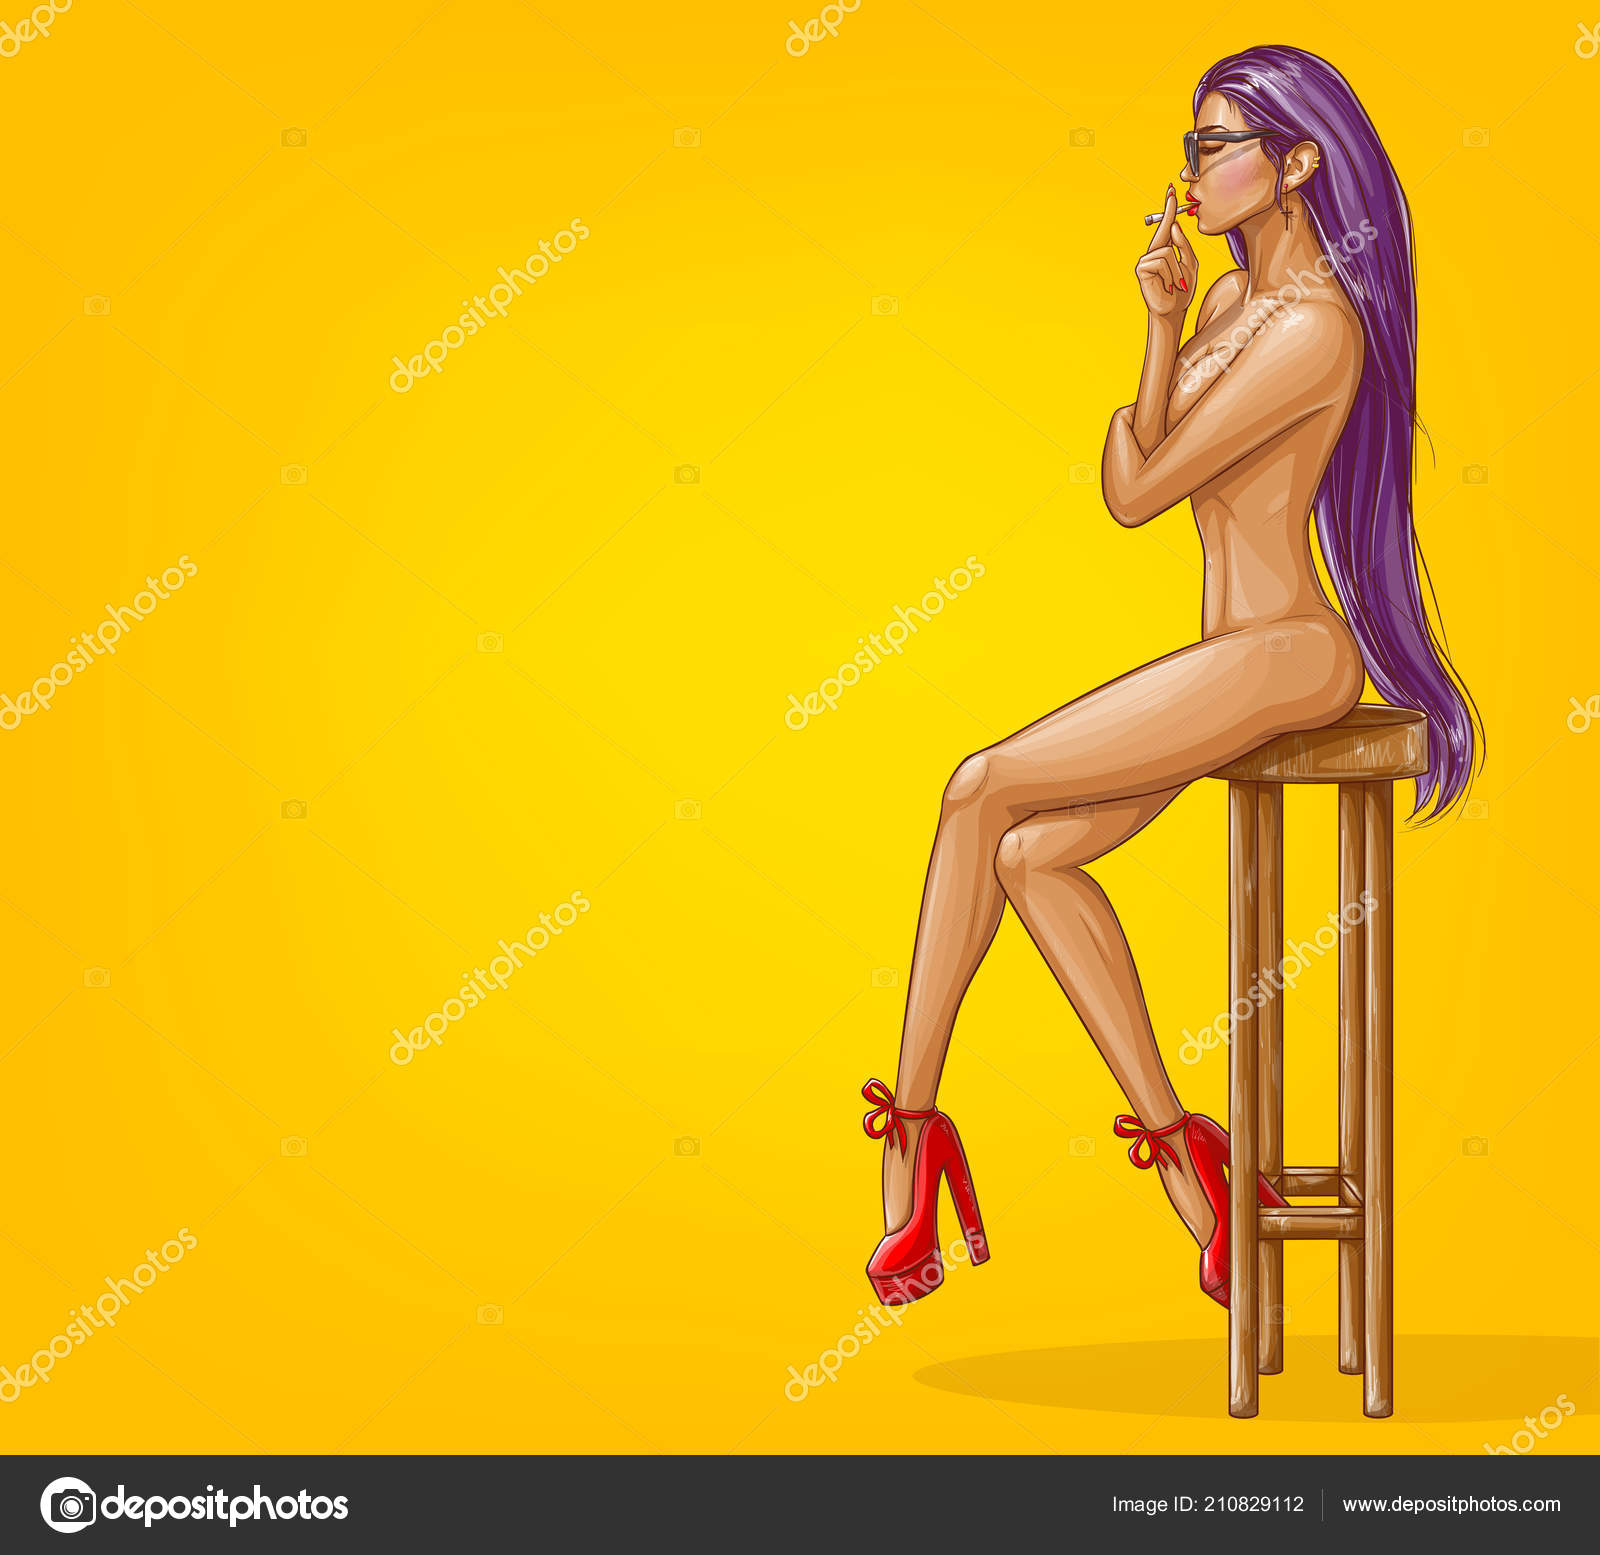 Sketches Of Cartoon Characters Nude - Vector naked girl is sitting on stool Stock Illustration by Â©vectorpocket  #210829112